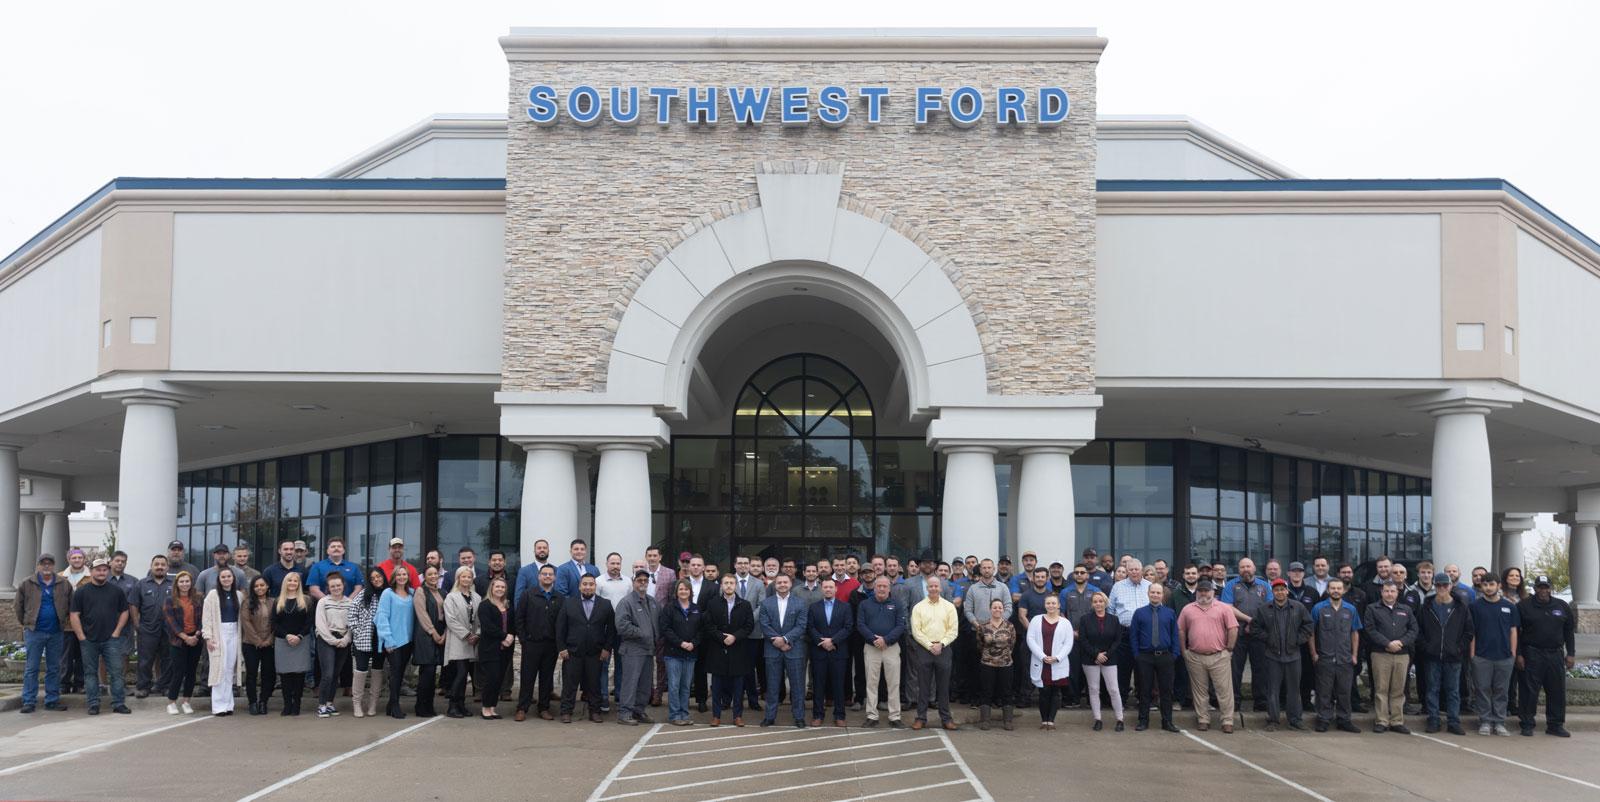 Southwest Ford Staff in front of dealership